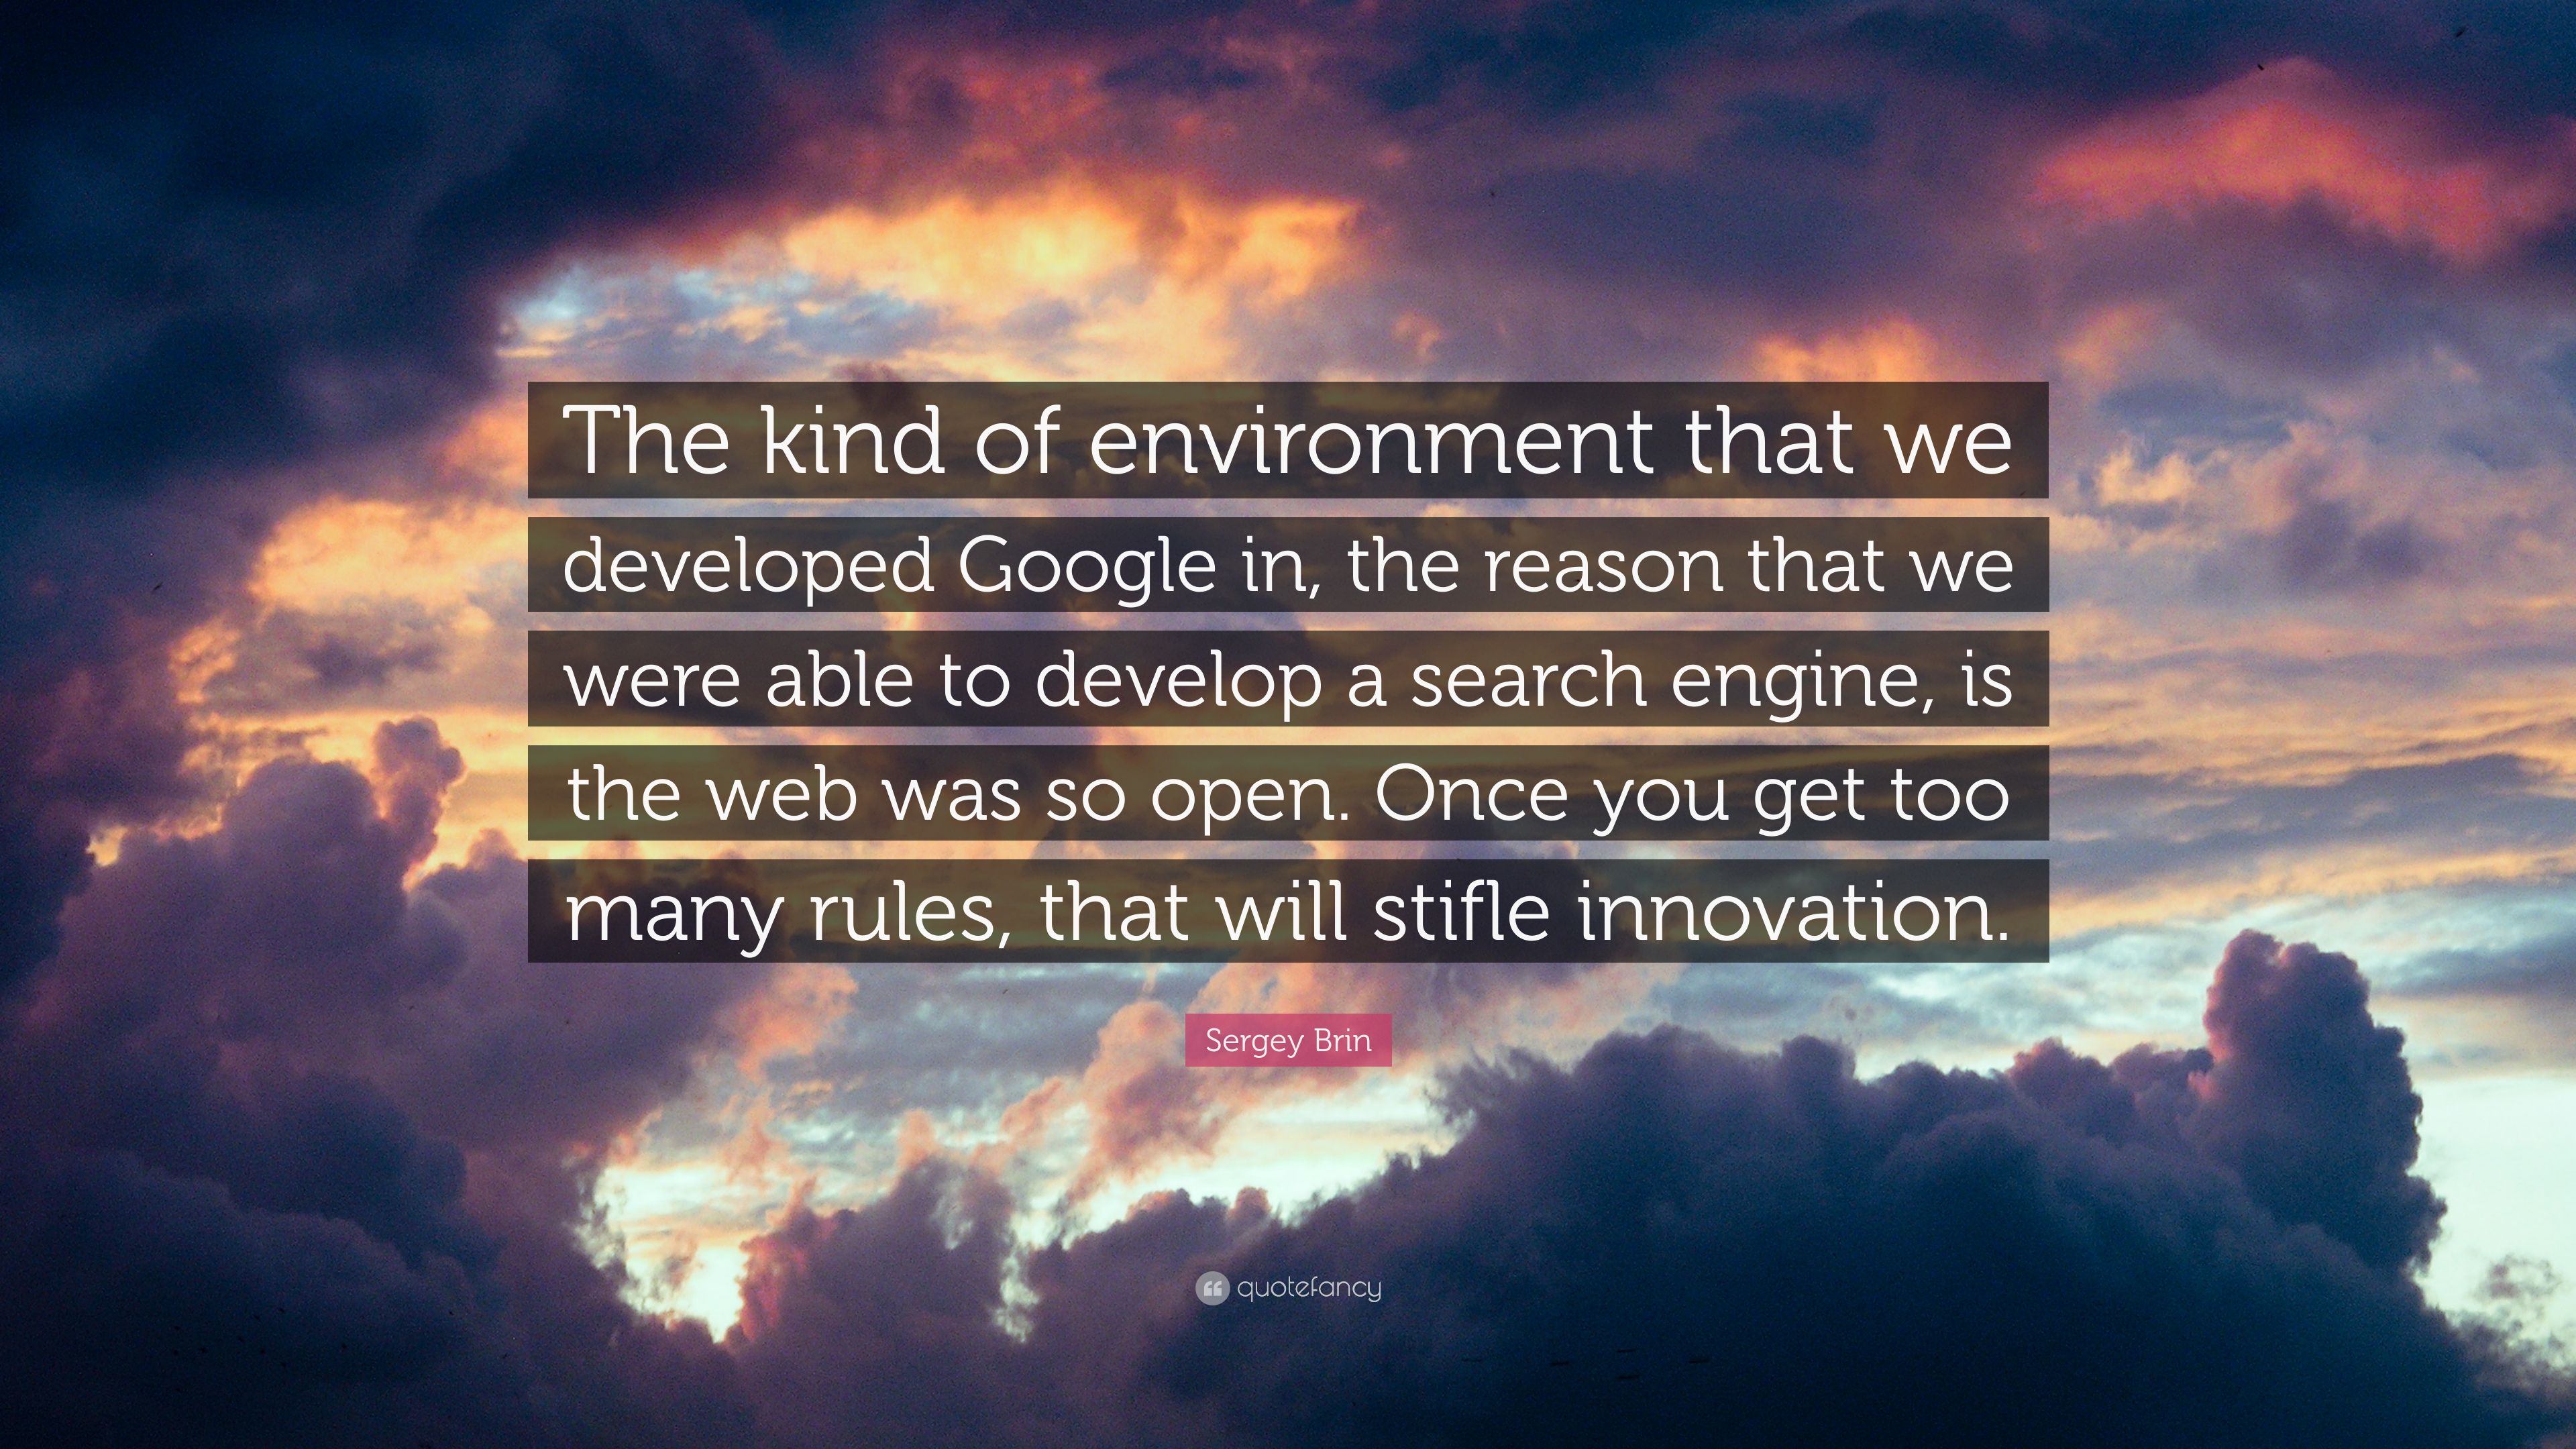 Sergey Brin Quote: “The kind of environment that we developed